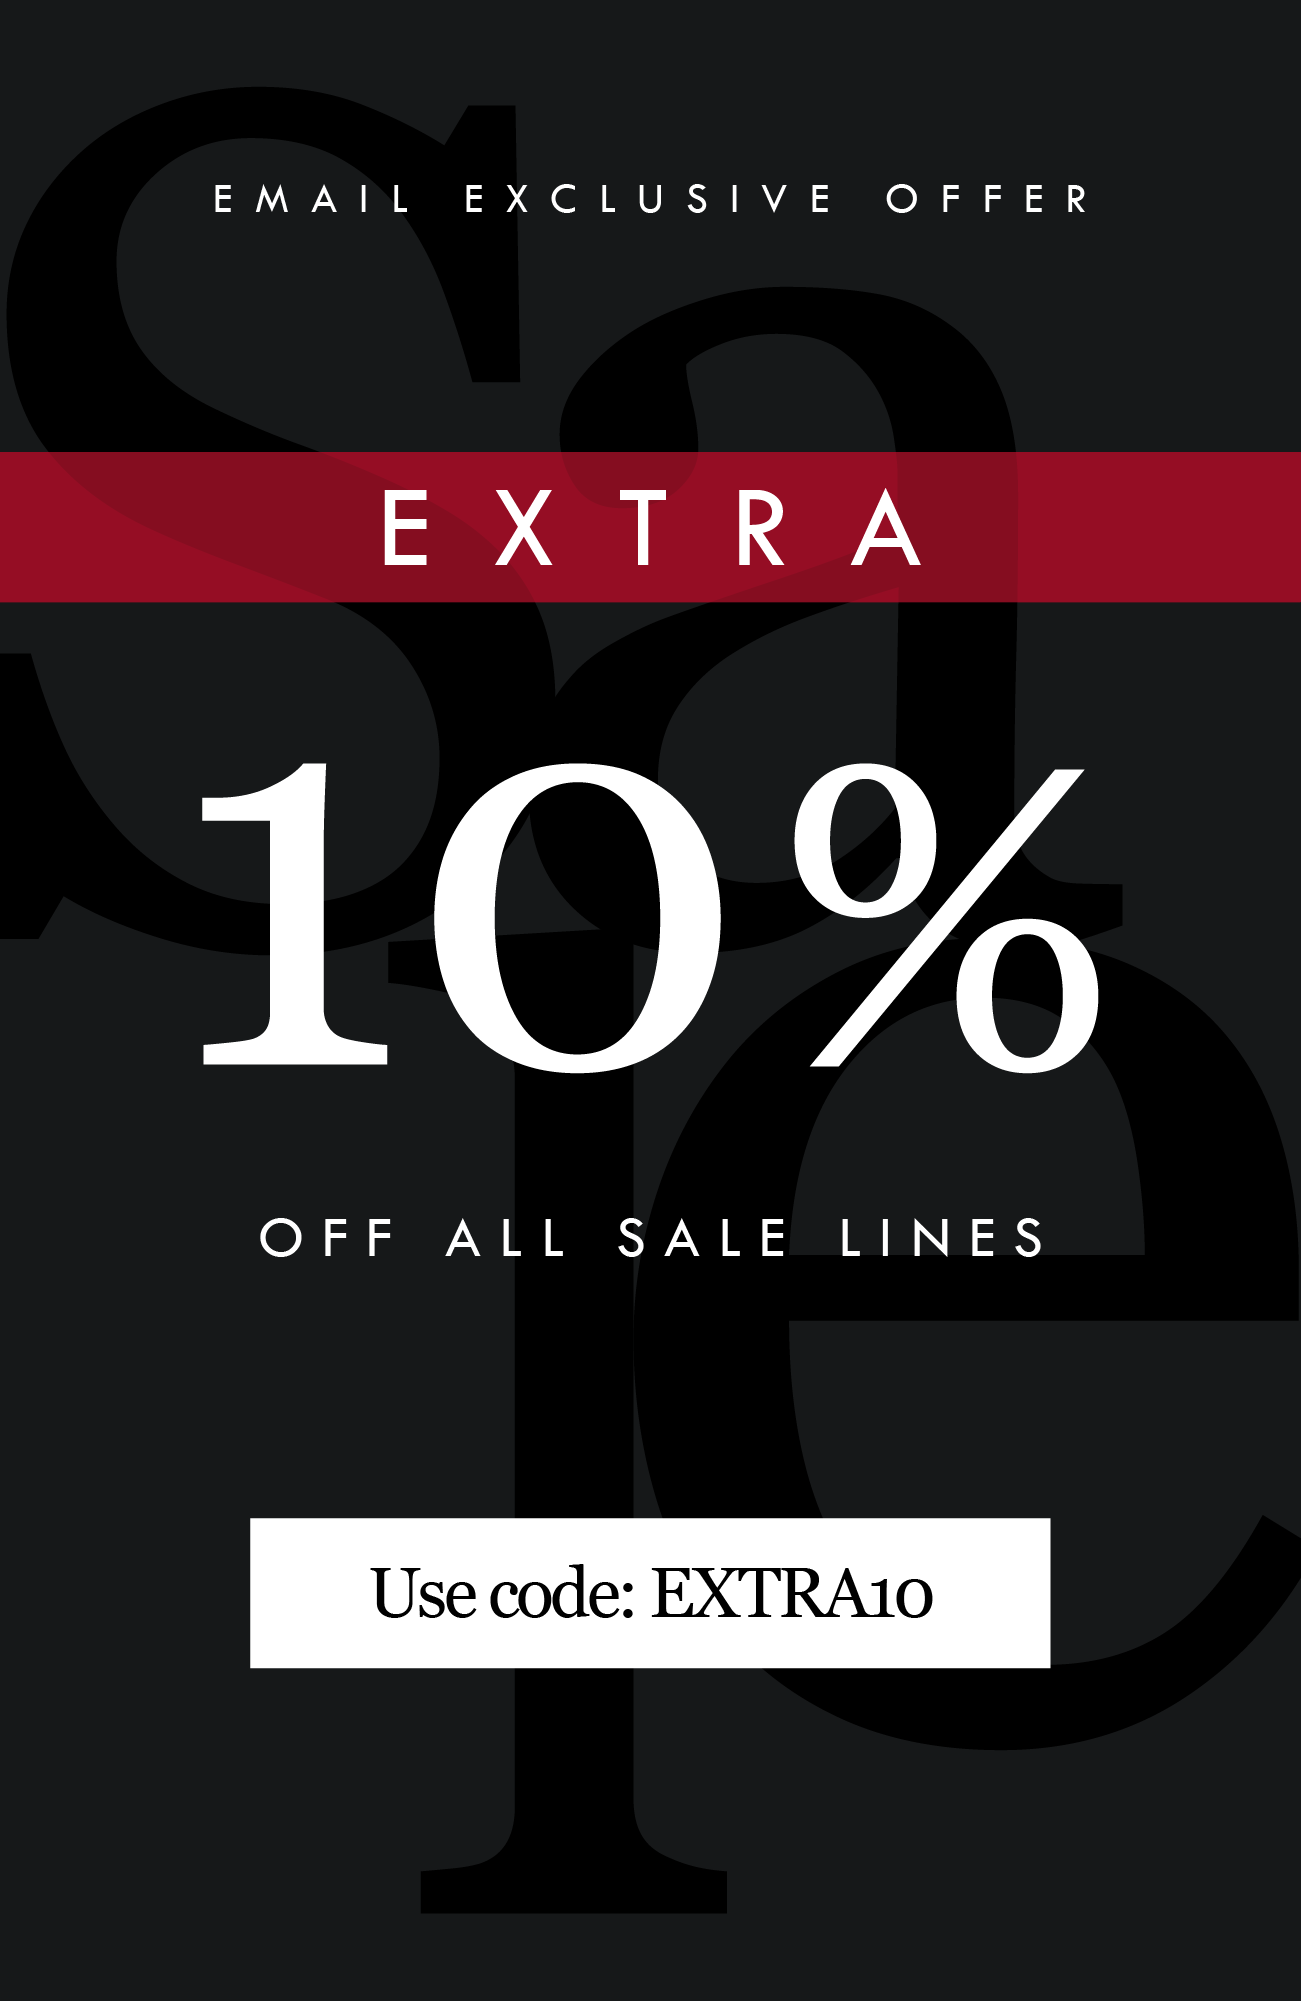 EMAIL EXCLUSIVE 

EXTRA 
10% OFF ALL SALE LINES
Use Code: EXTRA10